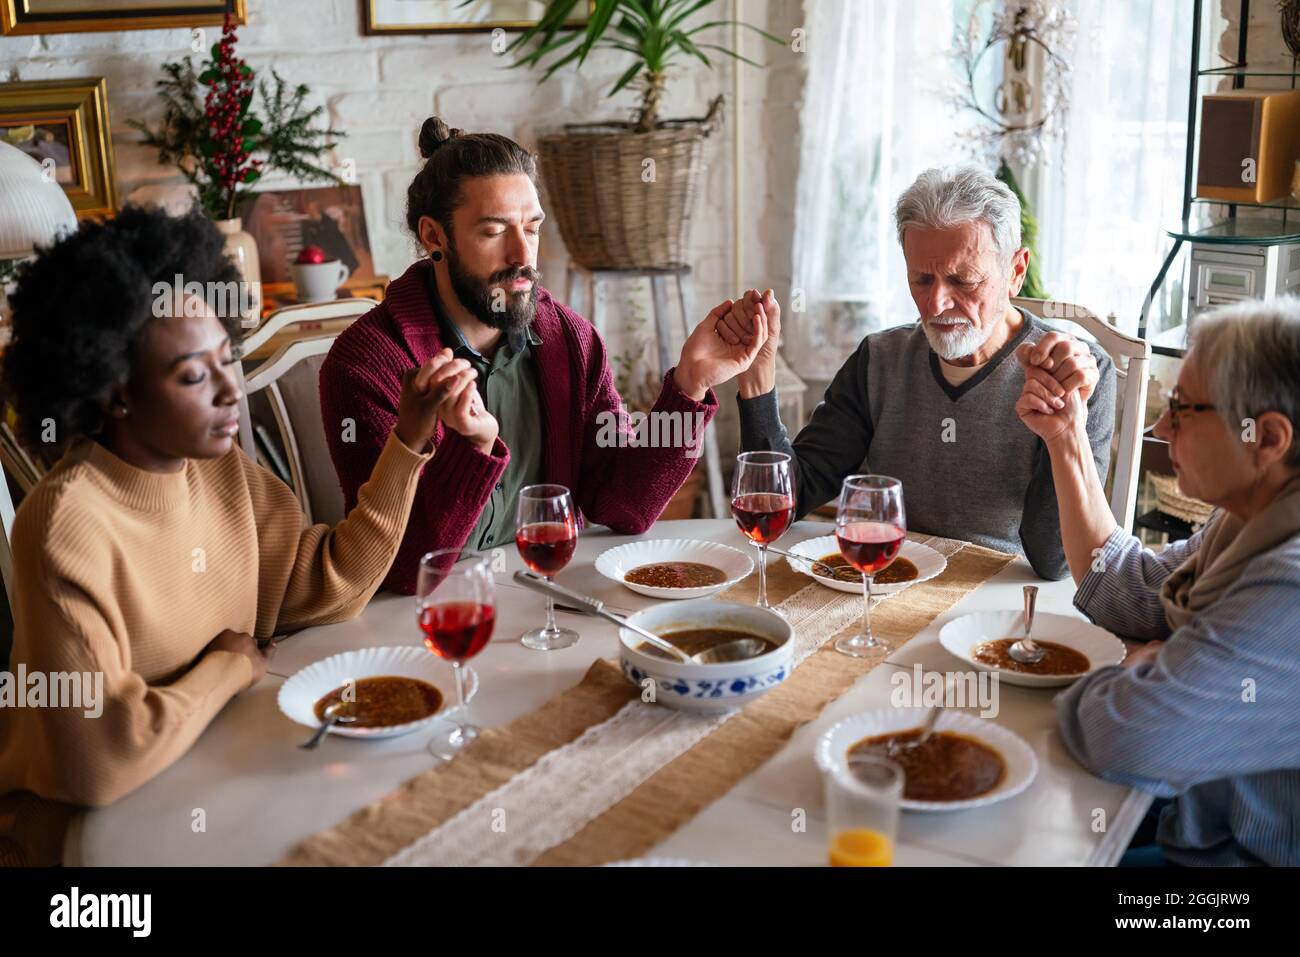 Family and religious concept. Group of multiethnic people with food praying before meal Stock Photo